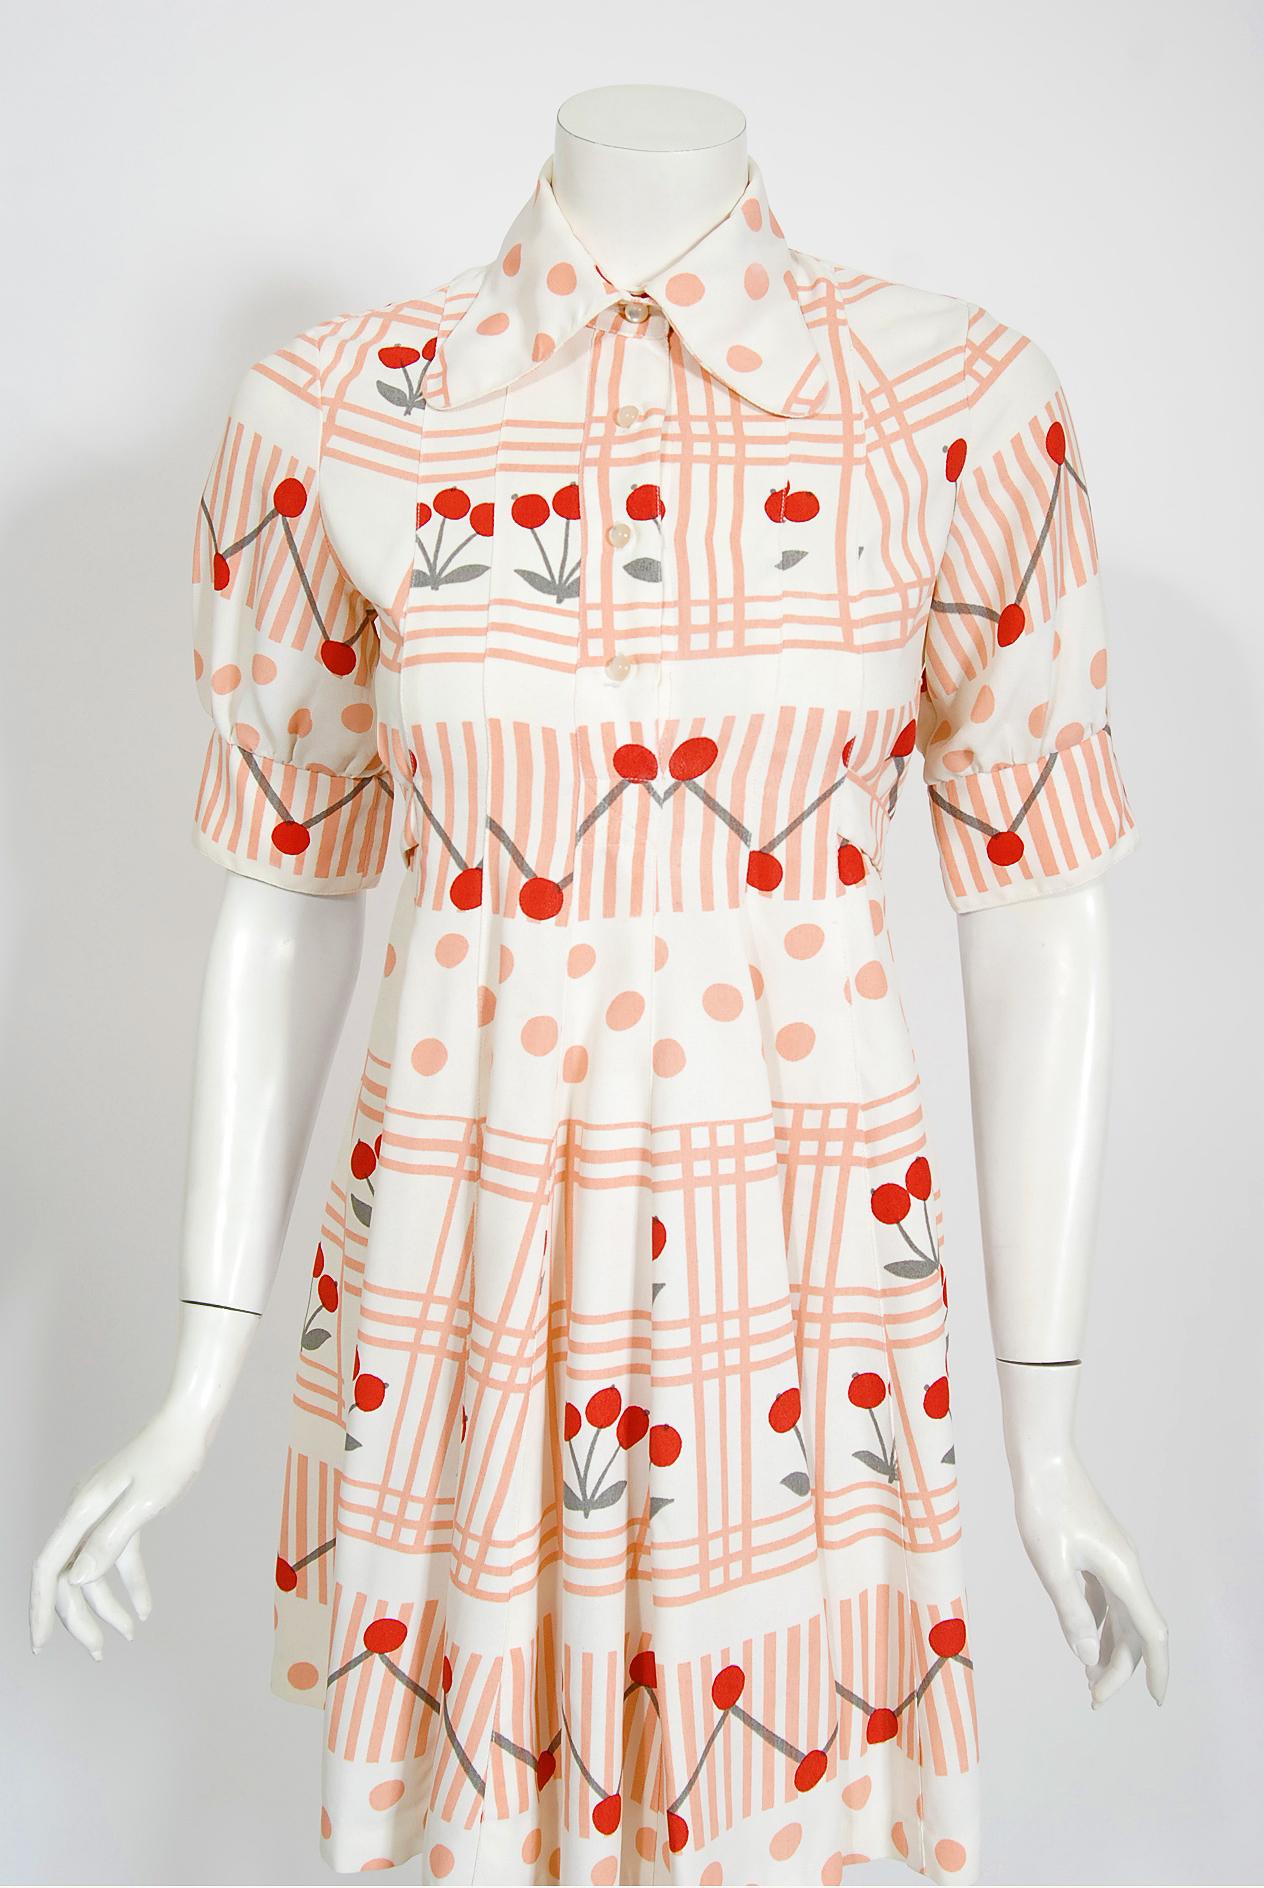 A totally chic and collectable Ossie Clark for Radley designer moss-crepe dress dating back to the mid 1970's. English fashion designer, Raymond Ossie Clark, was a leading light in the London swinging sixties fashion era and is now renowned for his